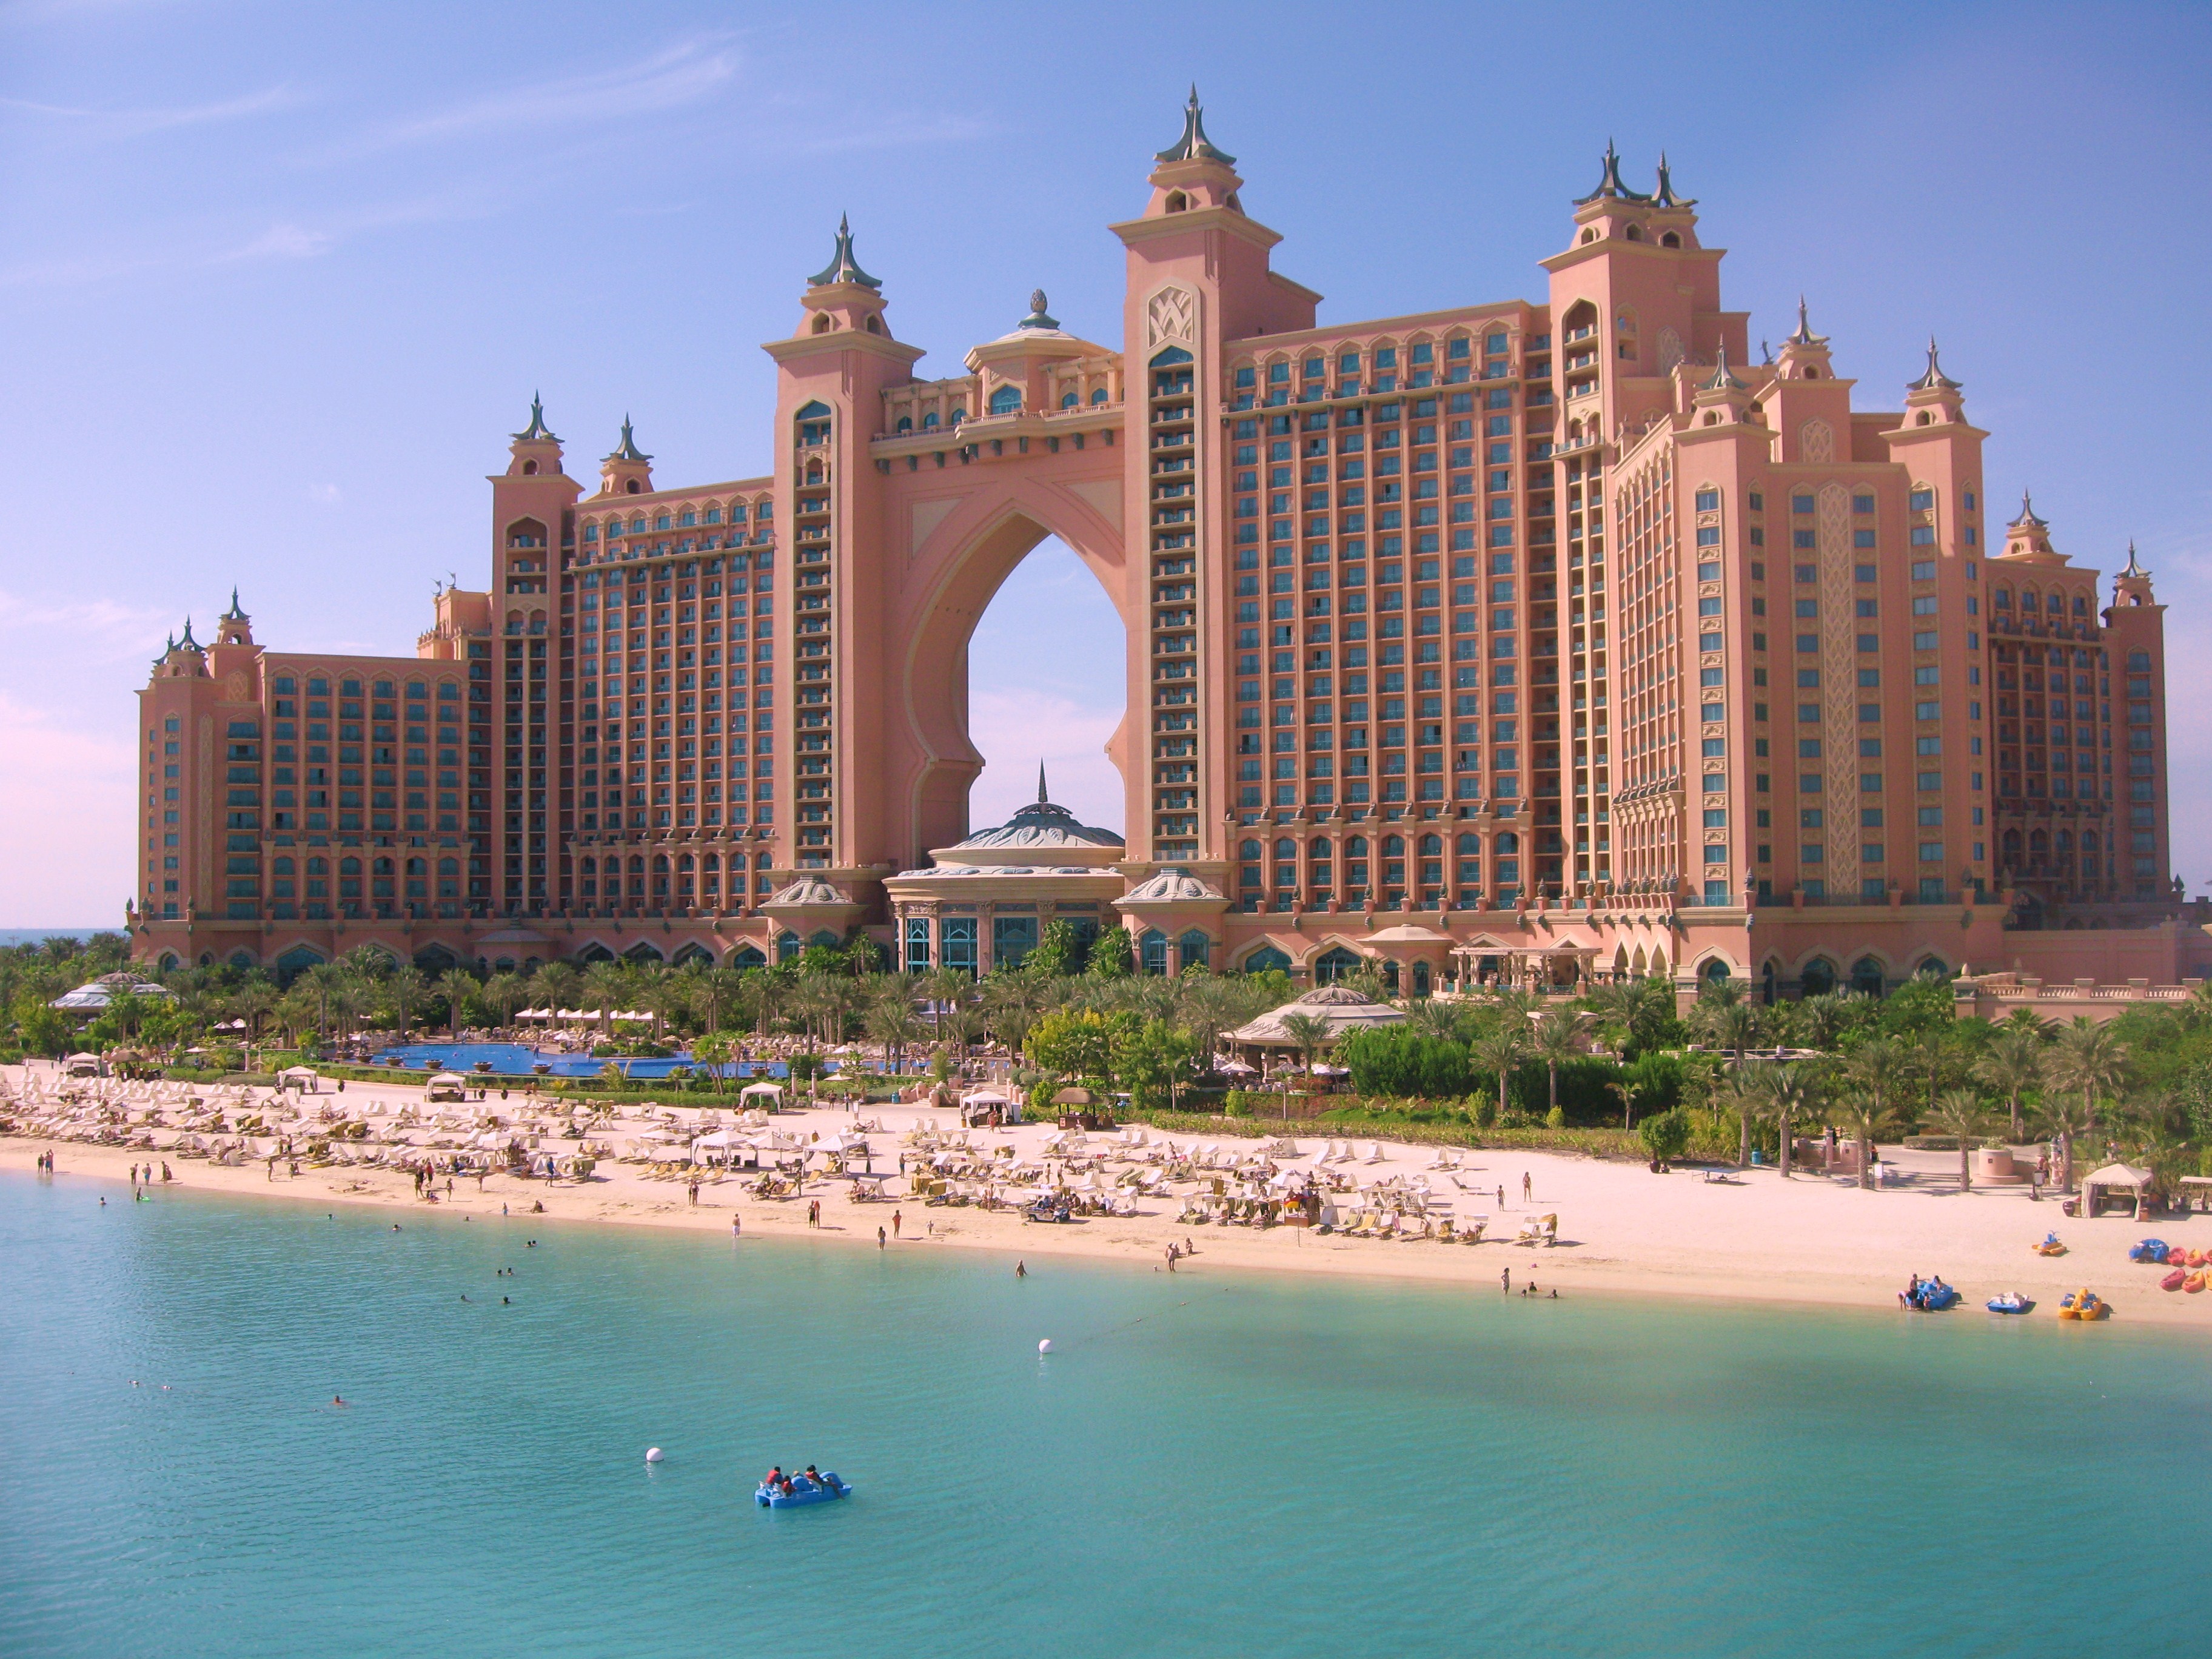 The Hotel Atlantis the Palm in chavtastic Dubai: the cheapest rate there is 1,340 euros per room night.